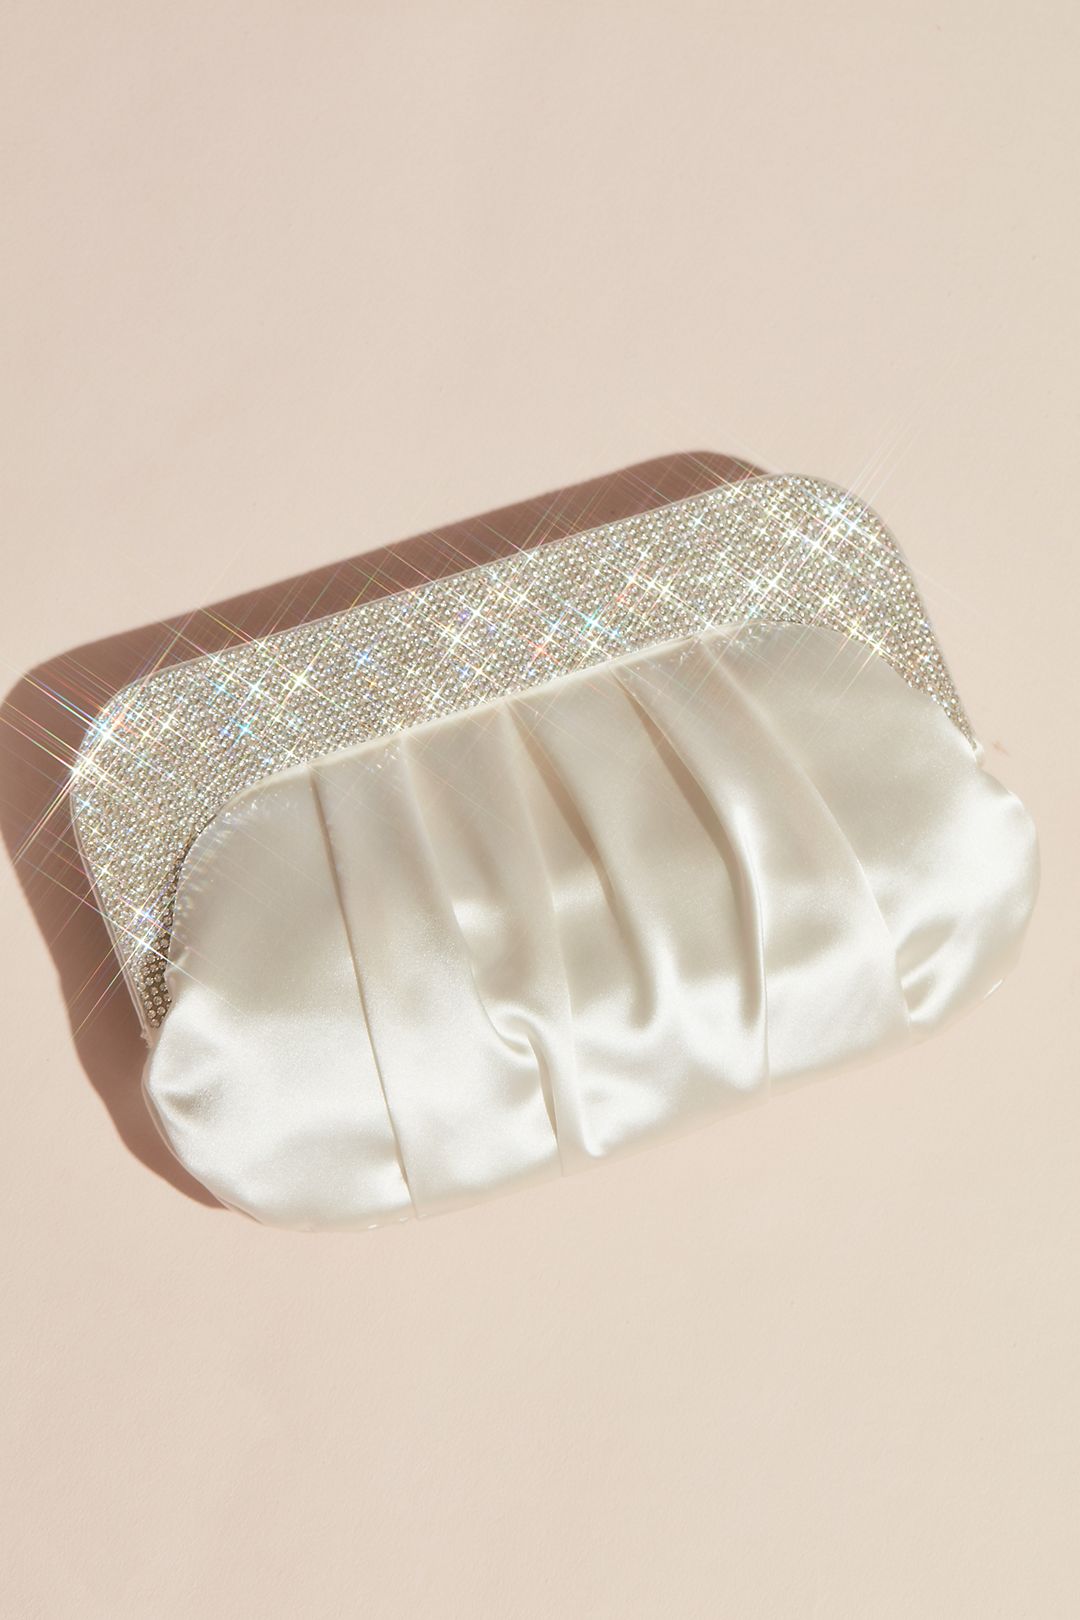 Pleated Satin Clutch with Crystal Handle Image 3